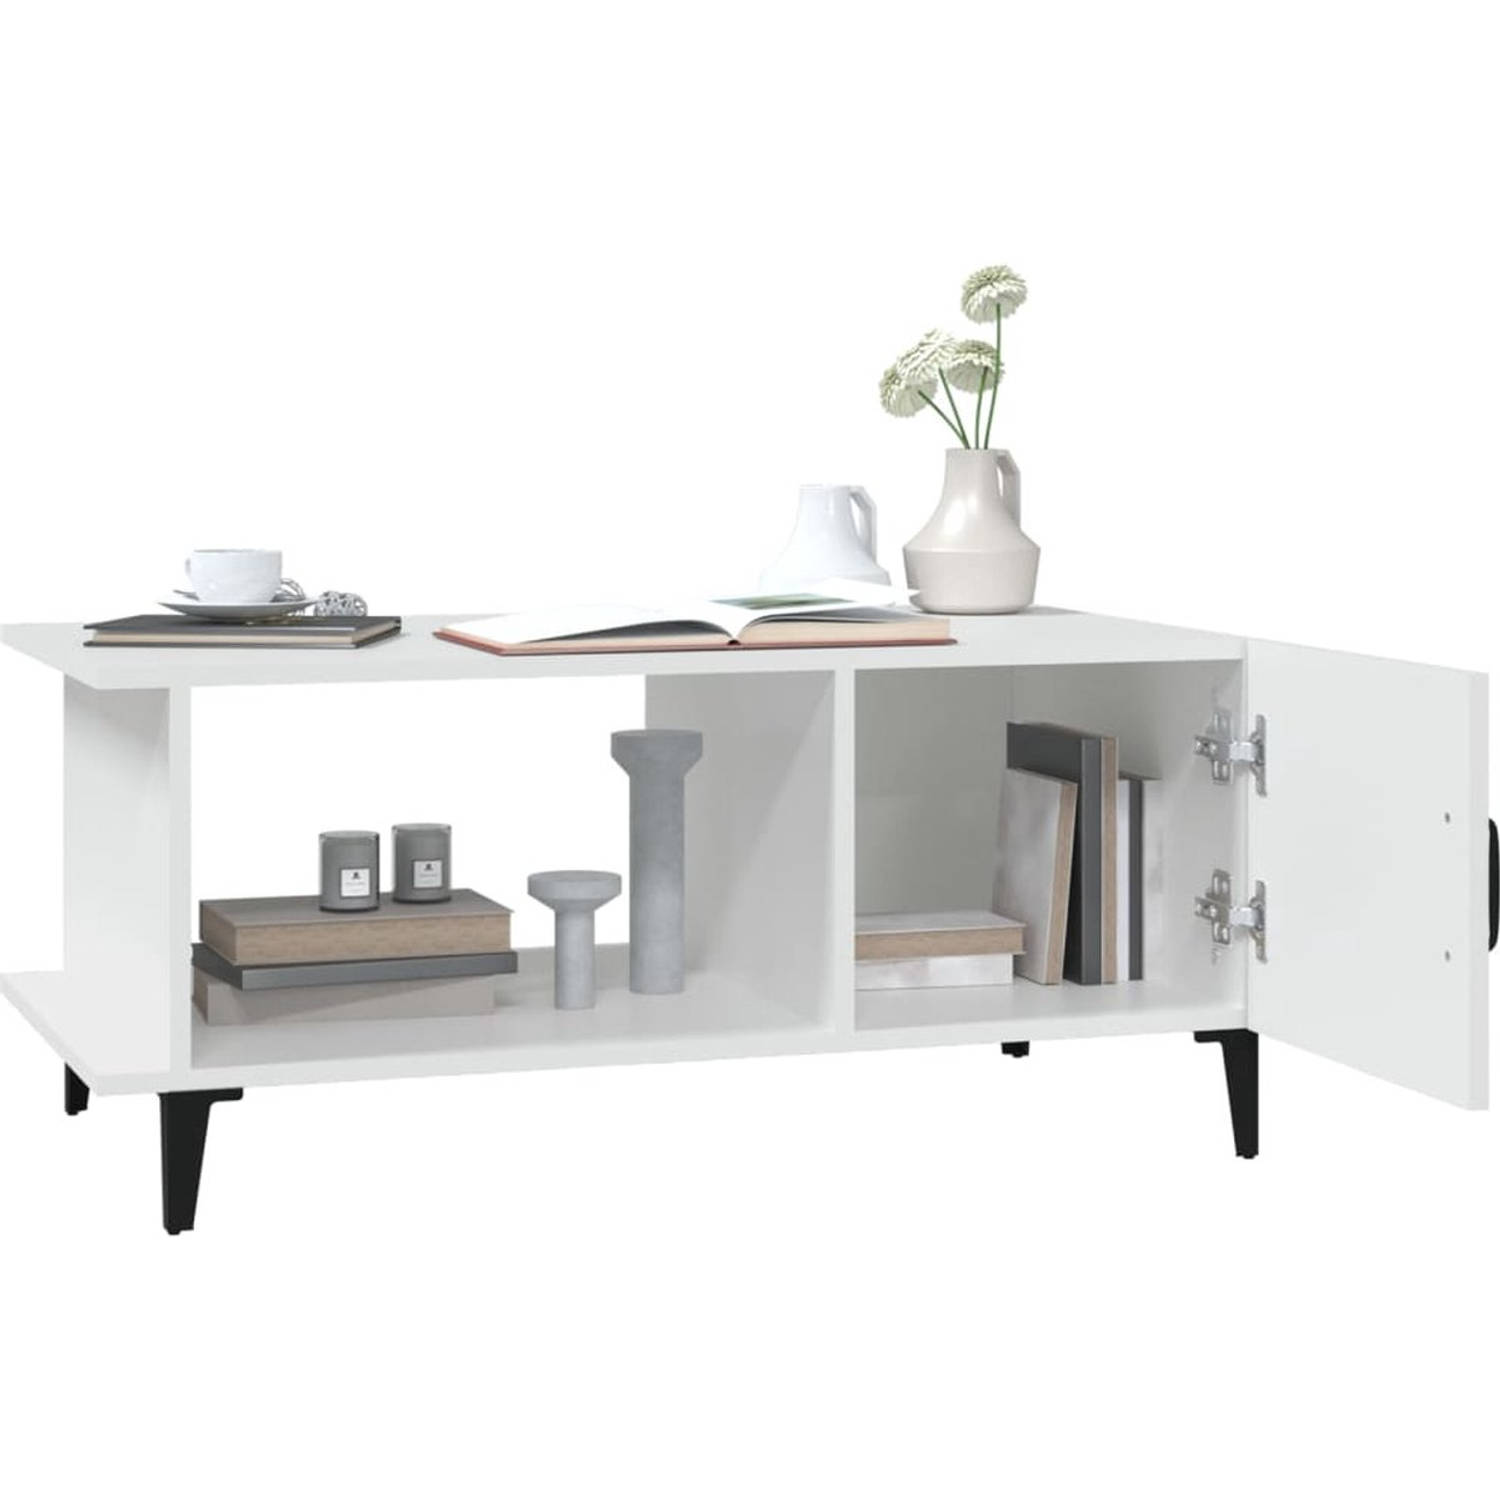 The Living Store Salontafel - Hout/Metaal - 90x50x40 cm - Wit